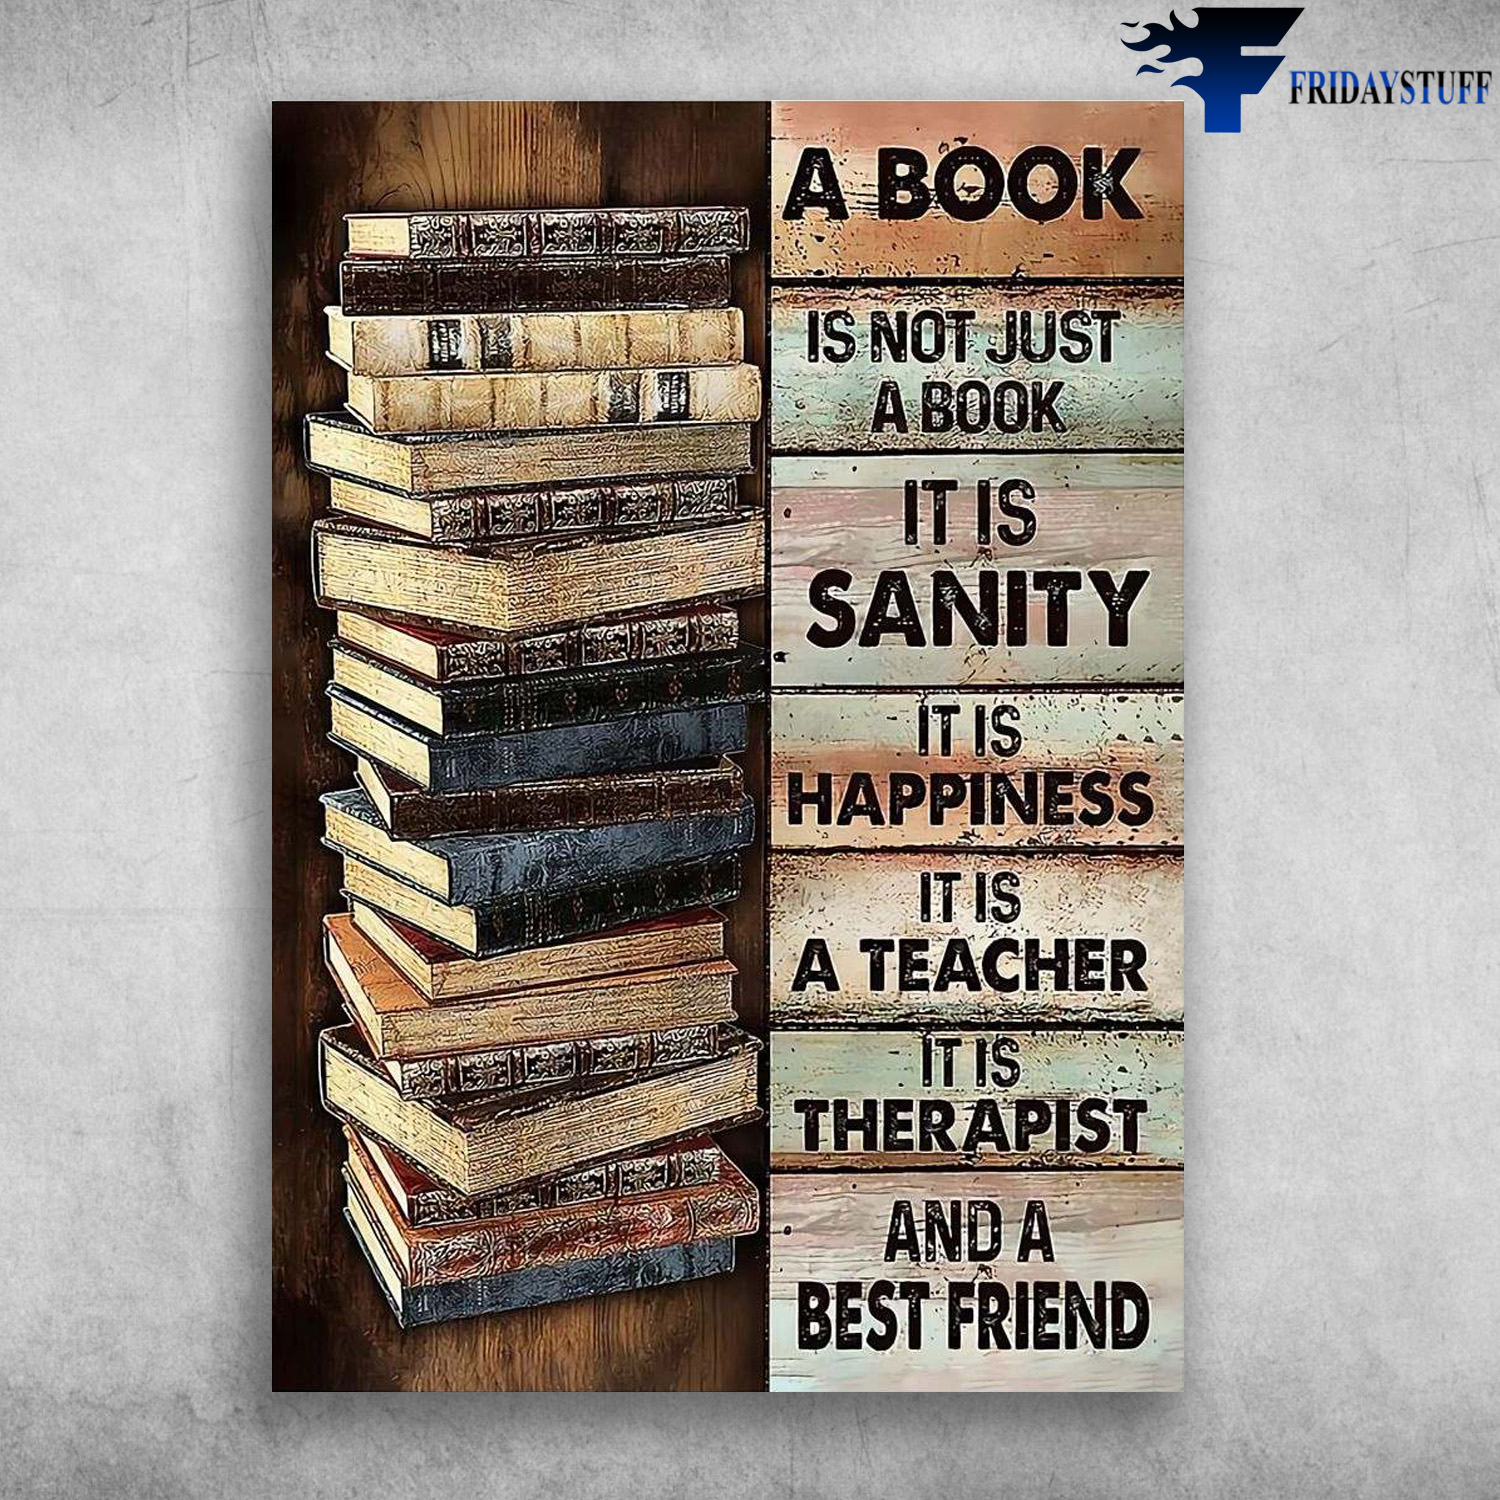 Book Lover, Book Is Friend– A Book Is Not Just A Book, It Is Sanity, It Is Happiness, It Os A Teacher, It Is Therapist, And A Best Friend